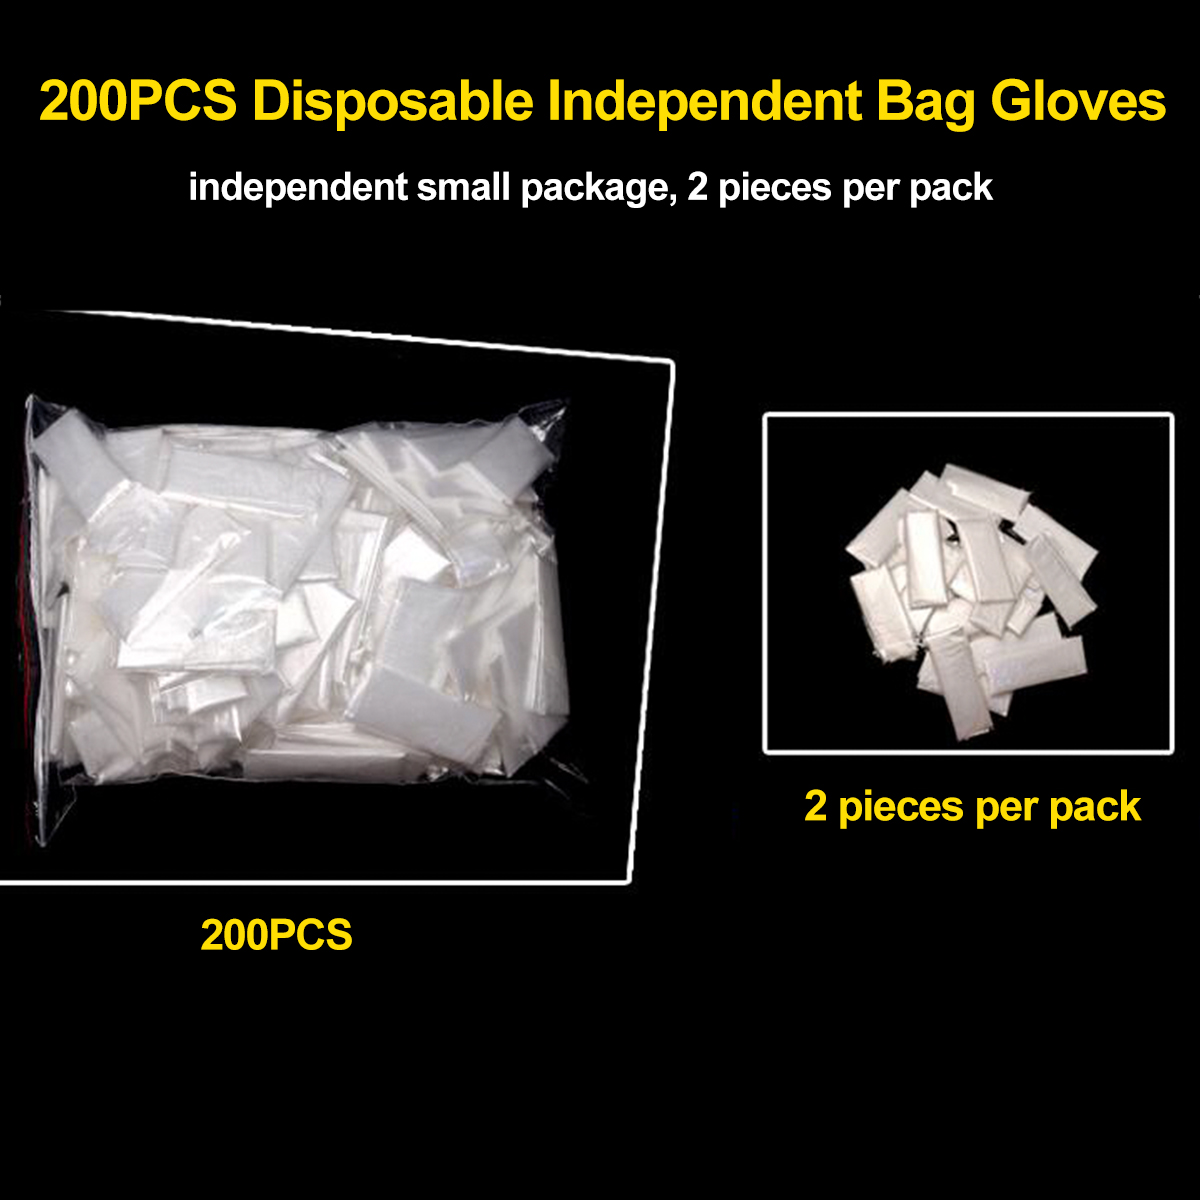 100PCS-Food-Grade-Disposable-Vinyl-Gloves-Anti-static-Plastic-Gloves-Home-Outdoor-Hiking-Camping-Glo-1657491-4